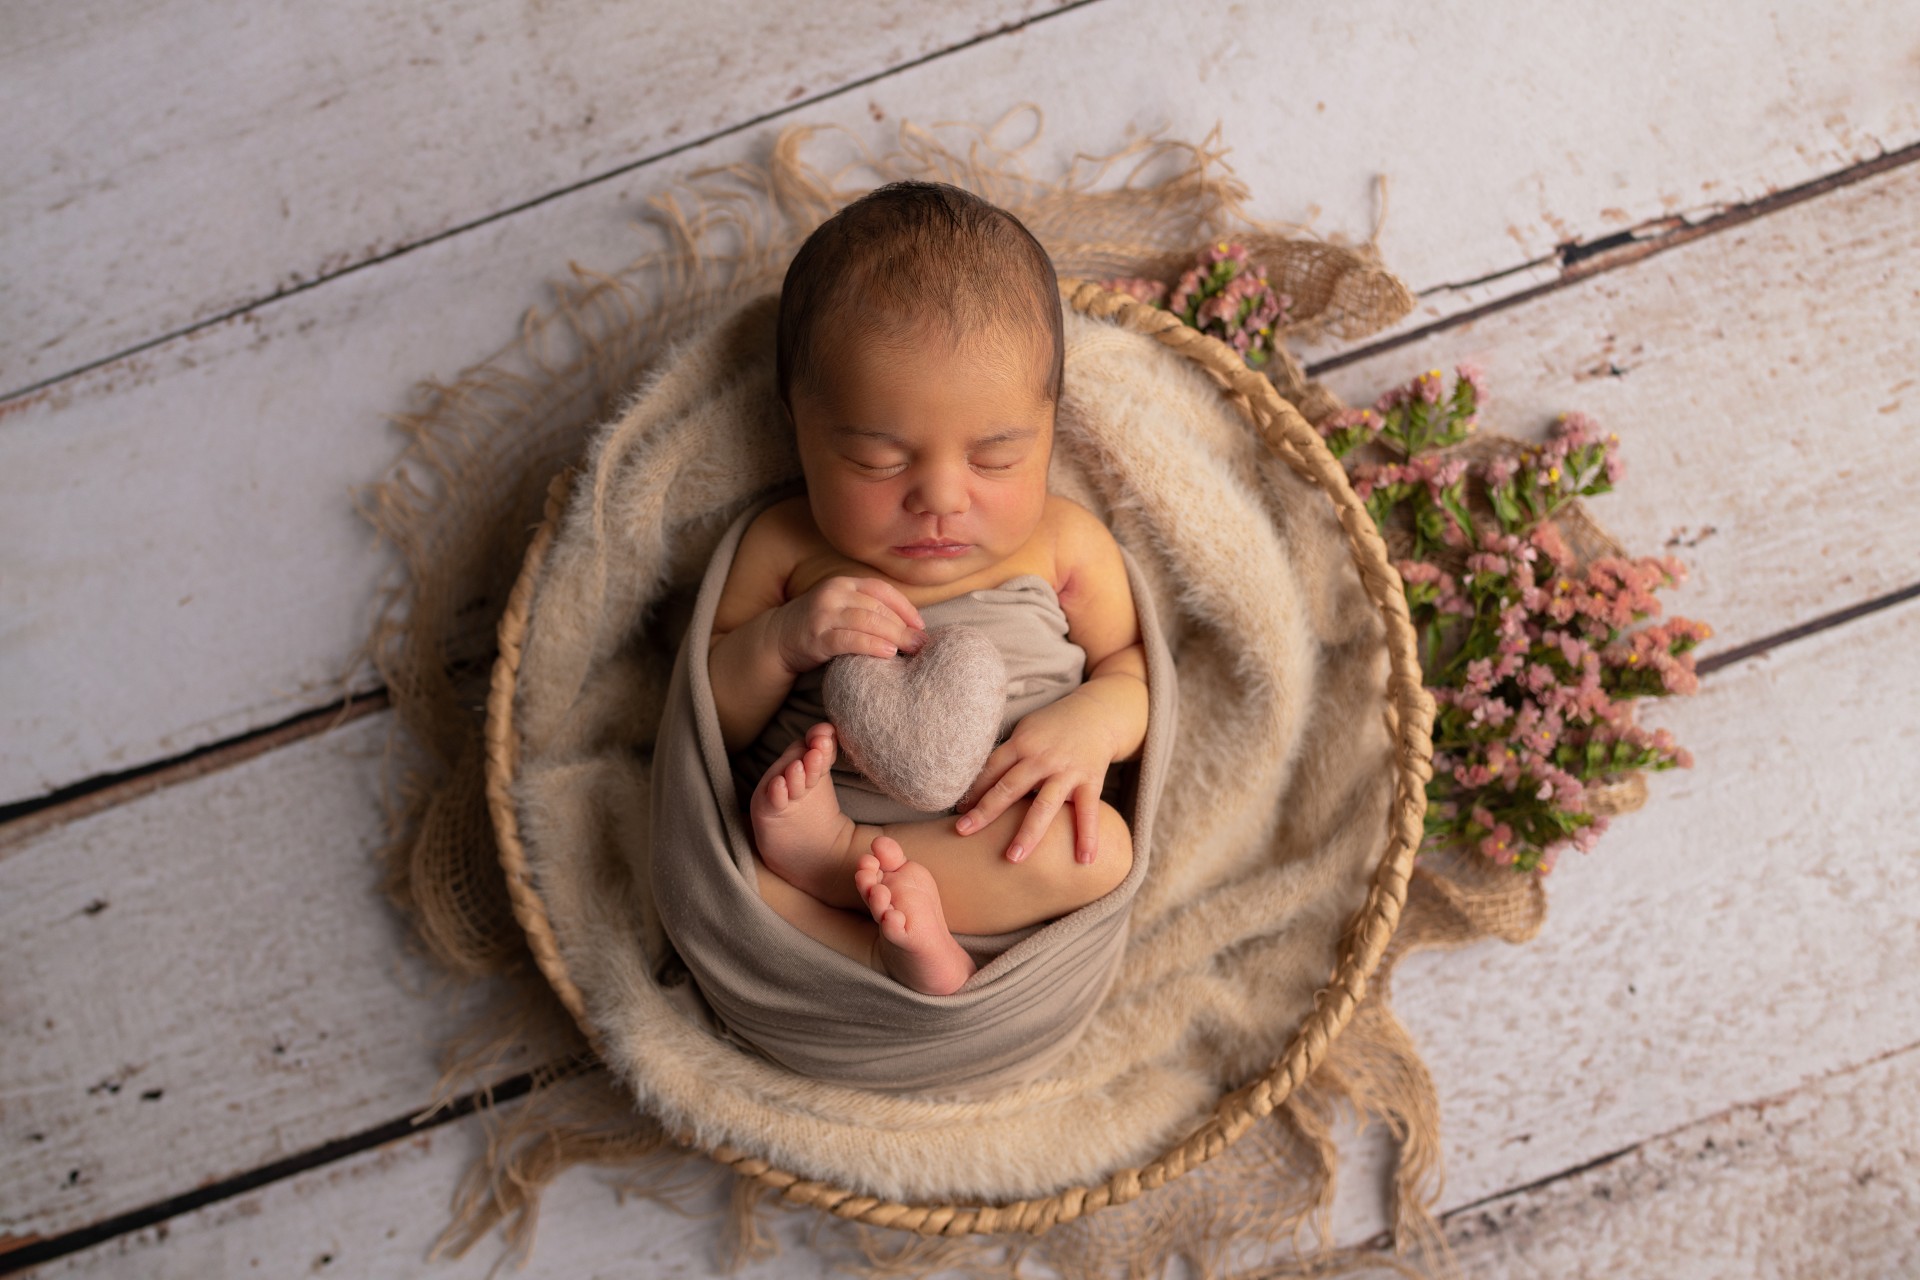 baby girl sleeping in the round basket, surrounded by flowers and holding a felted heart